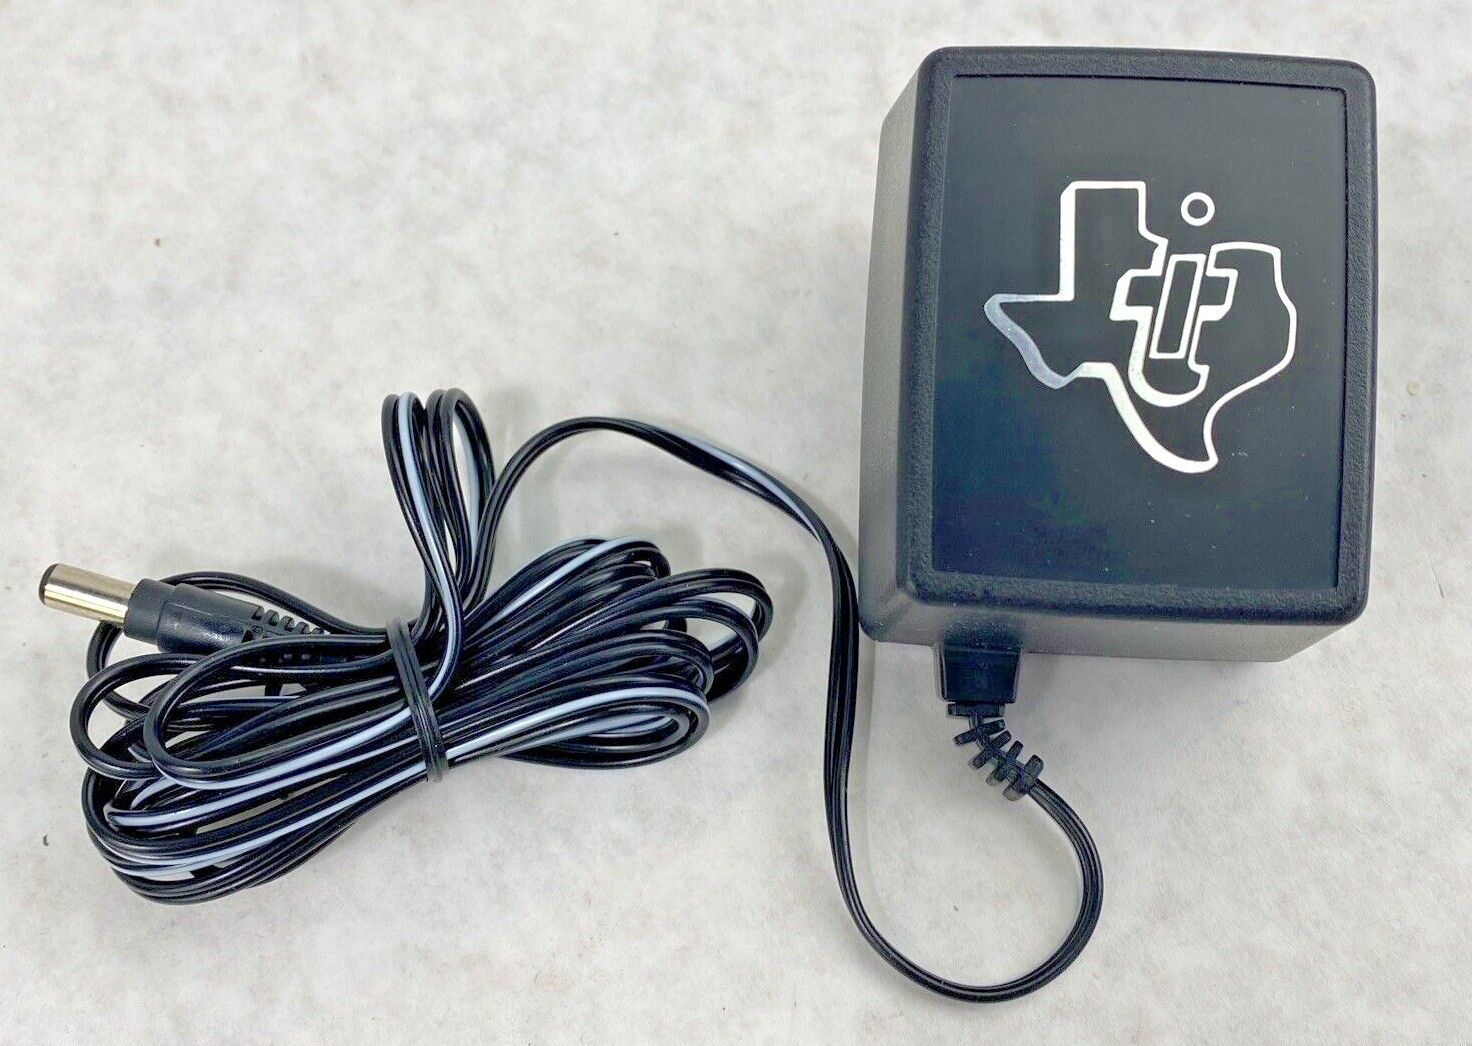 Genuine Texas Instruments 9201 AC Adapter New in Box